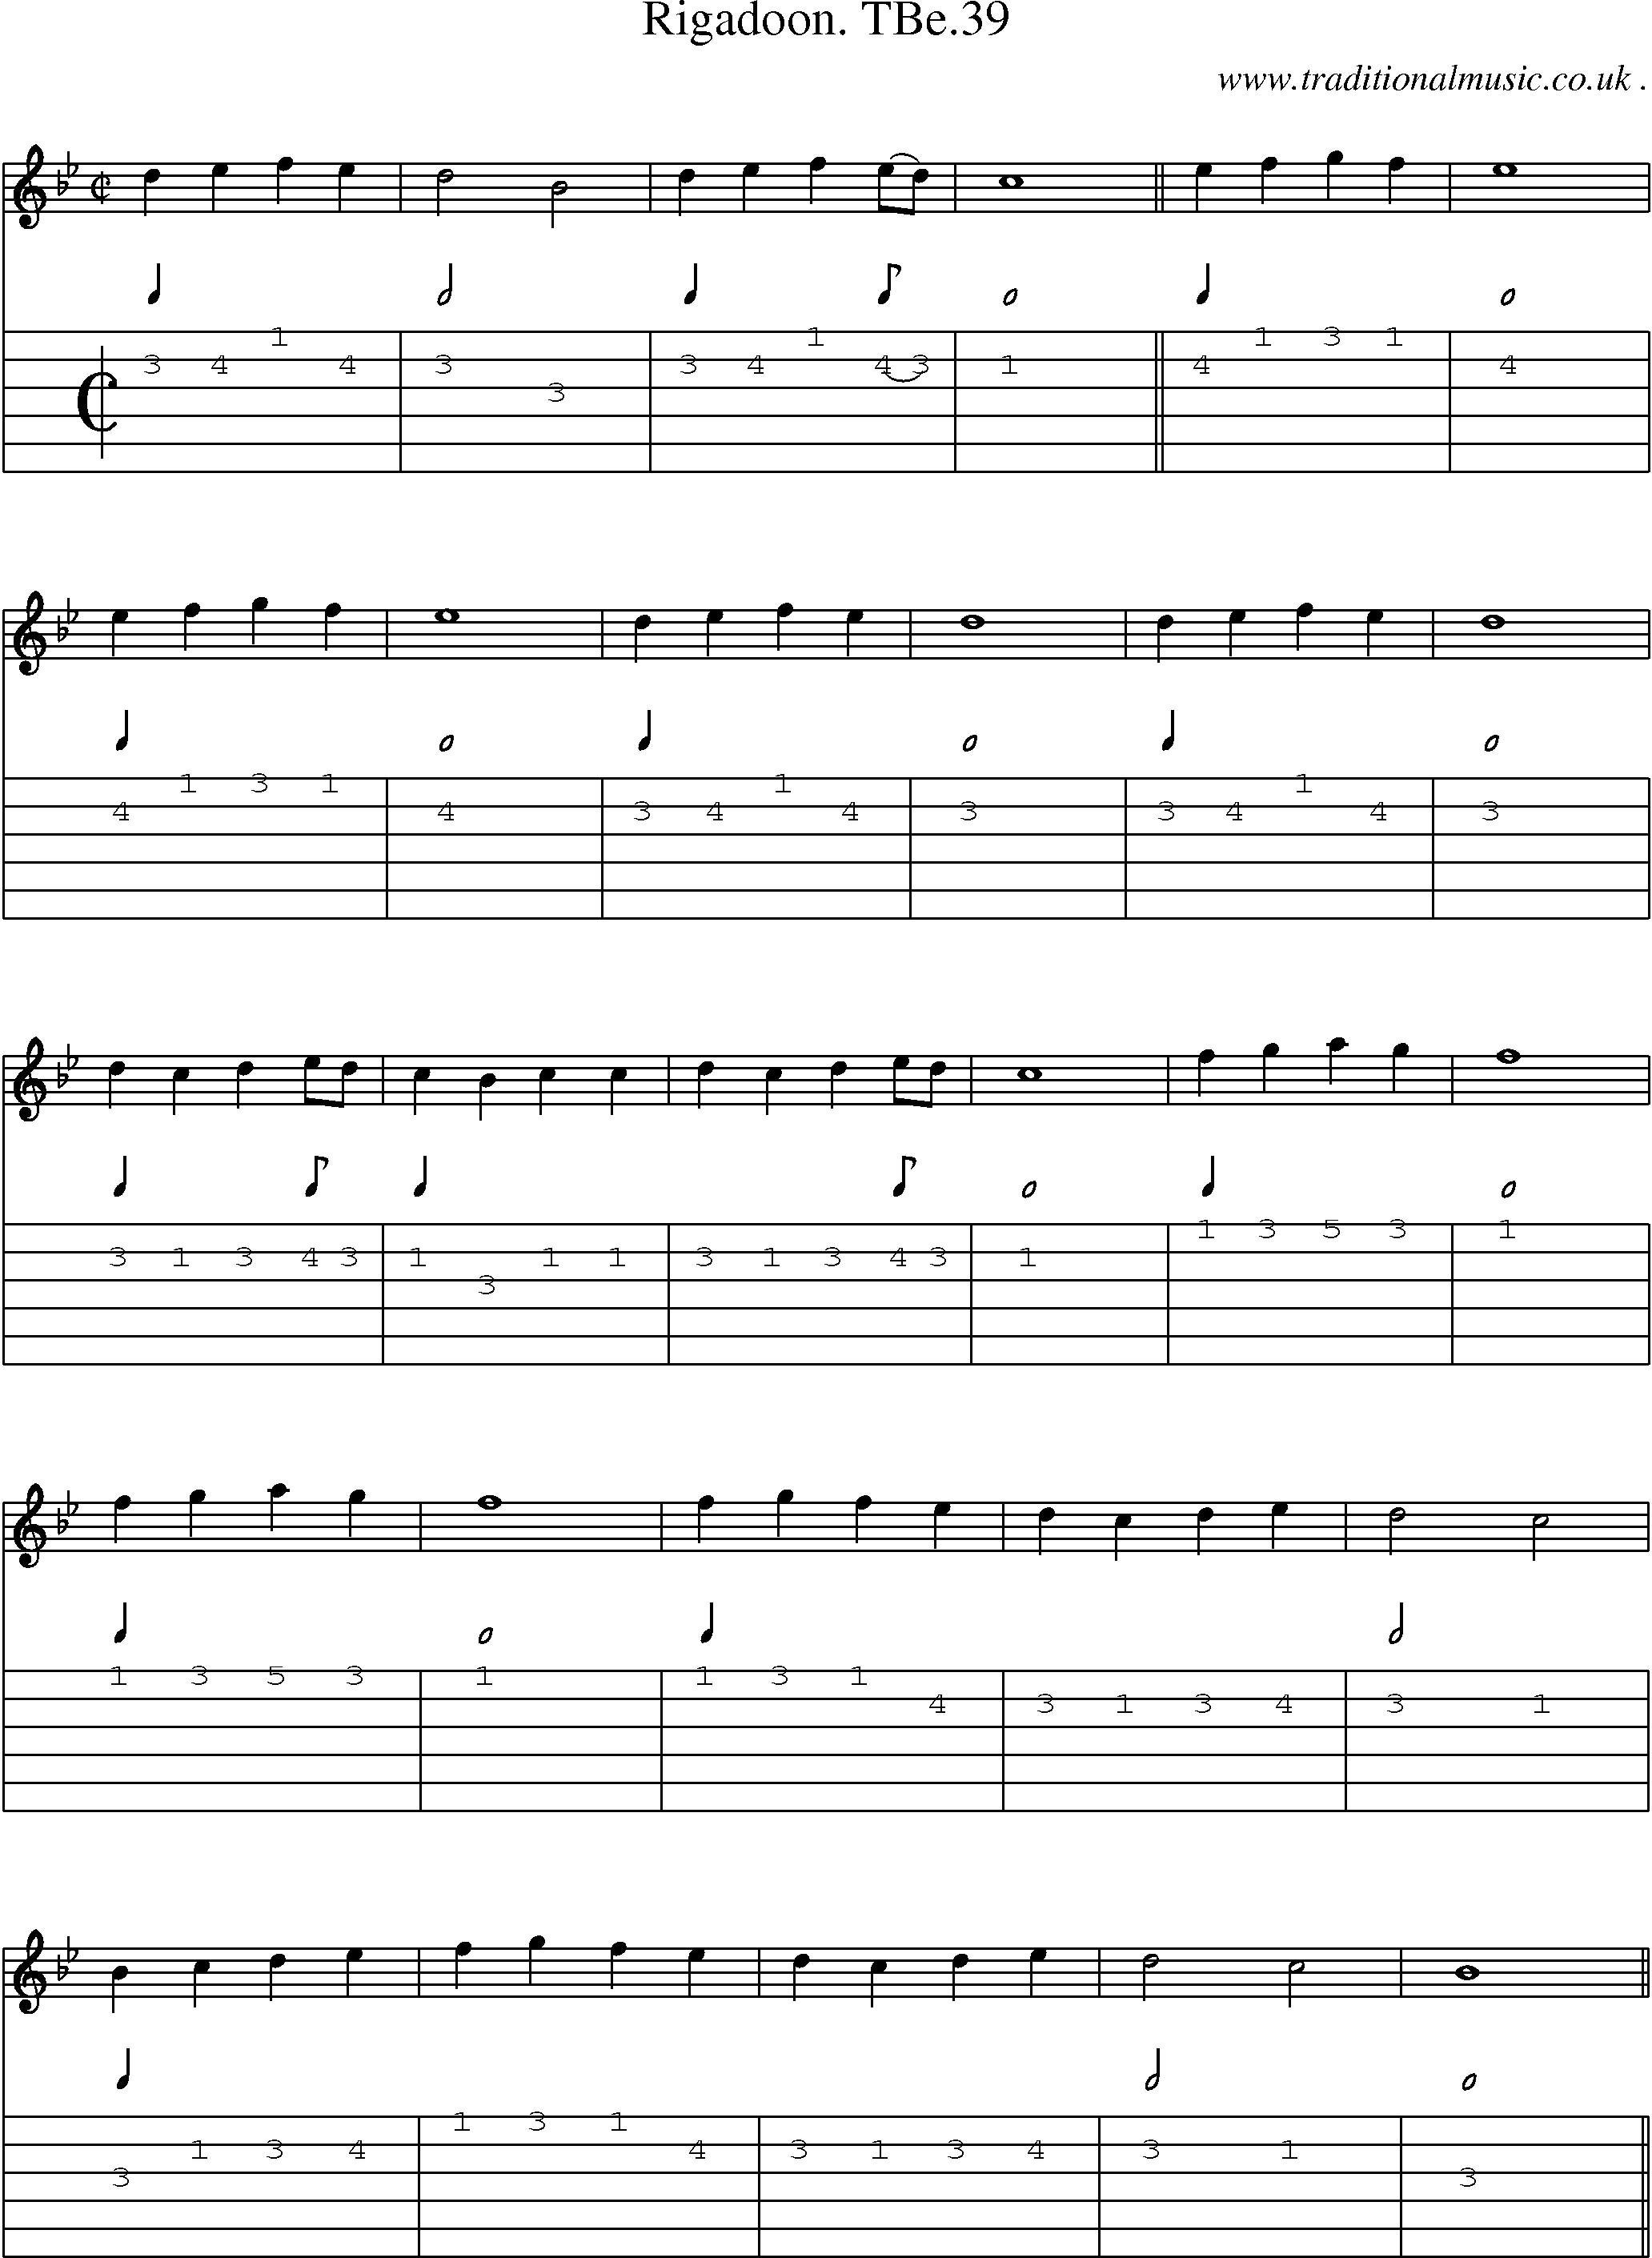 Sheet-Music and Guitar Tabs for Rigadoon Tbe39